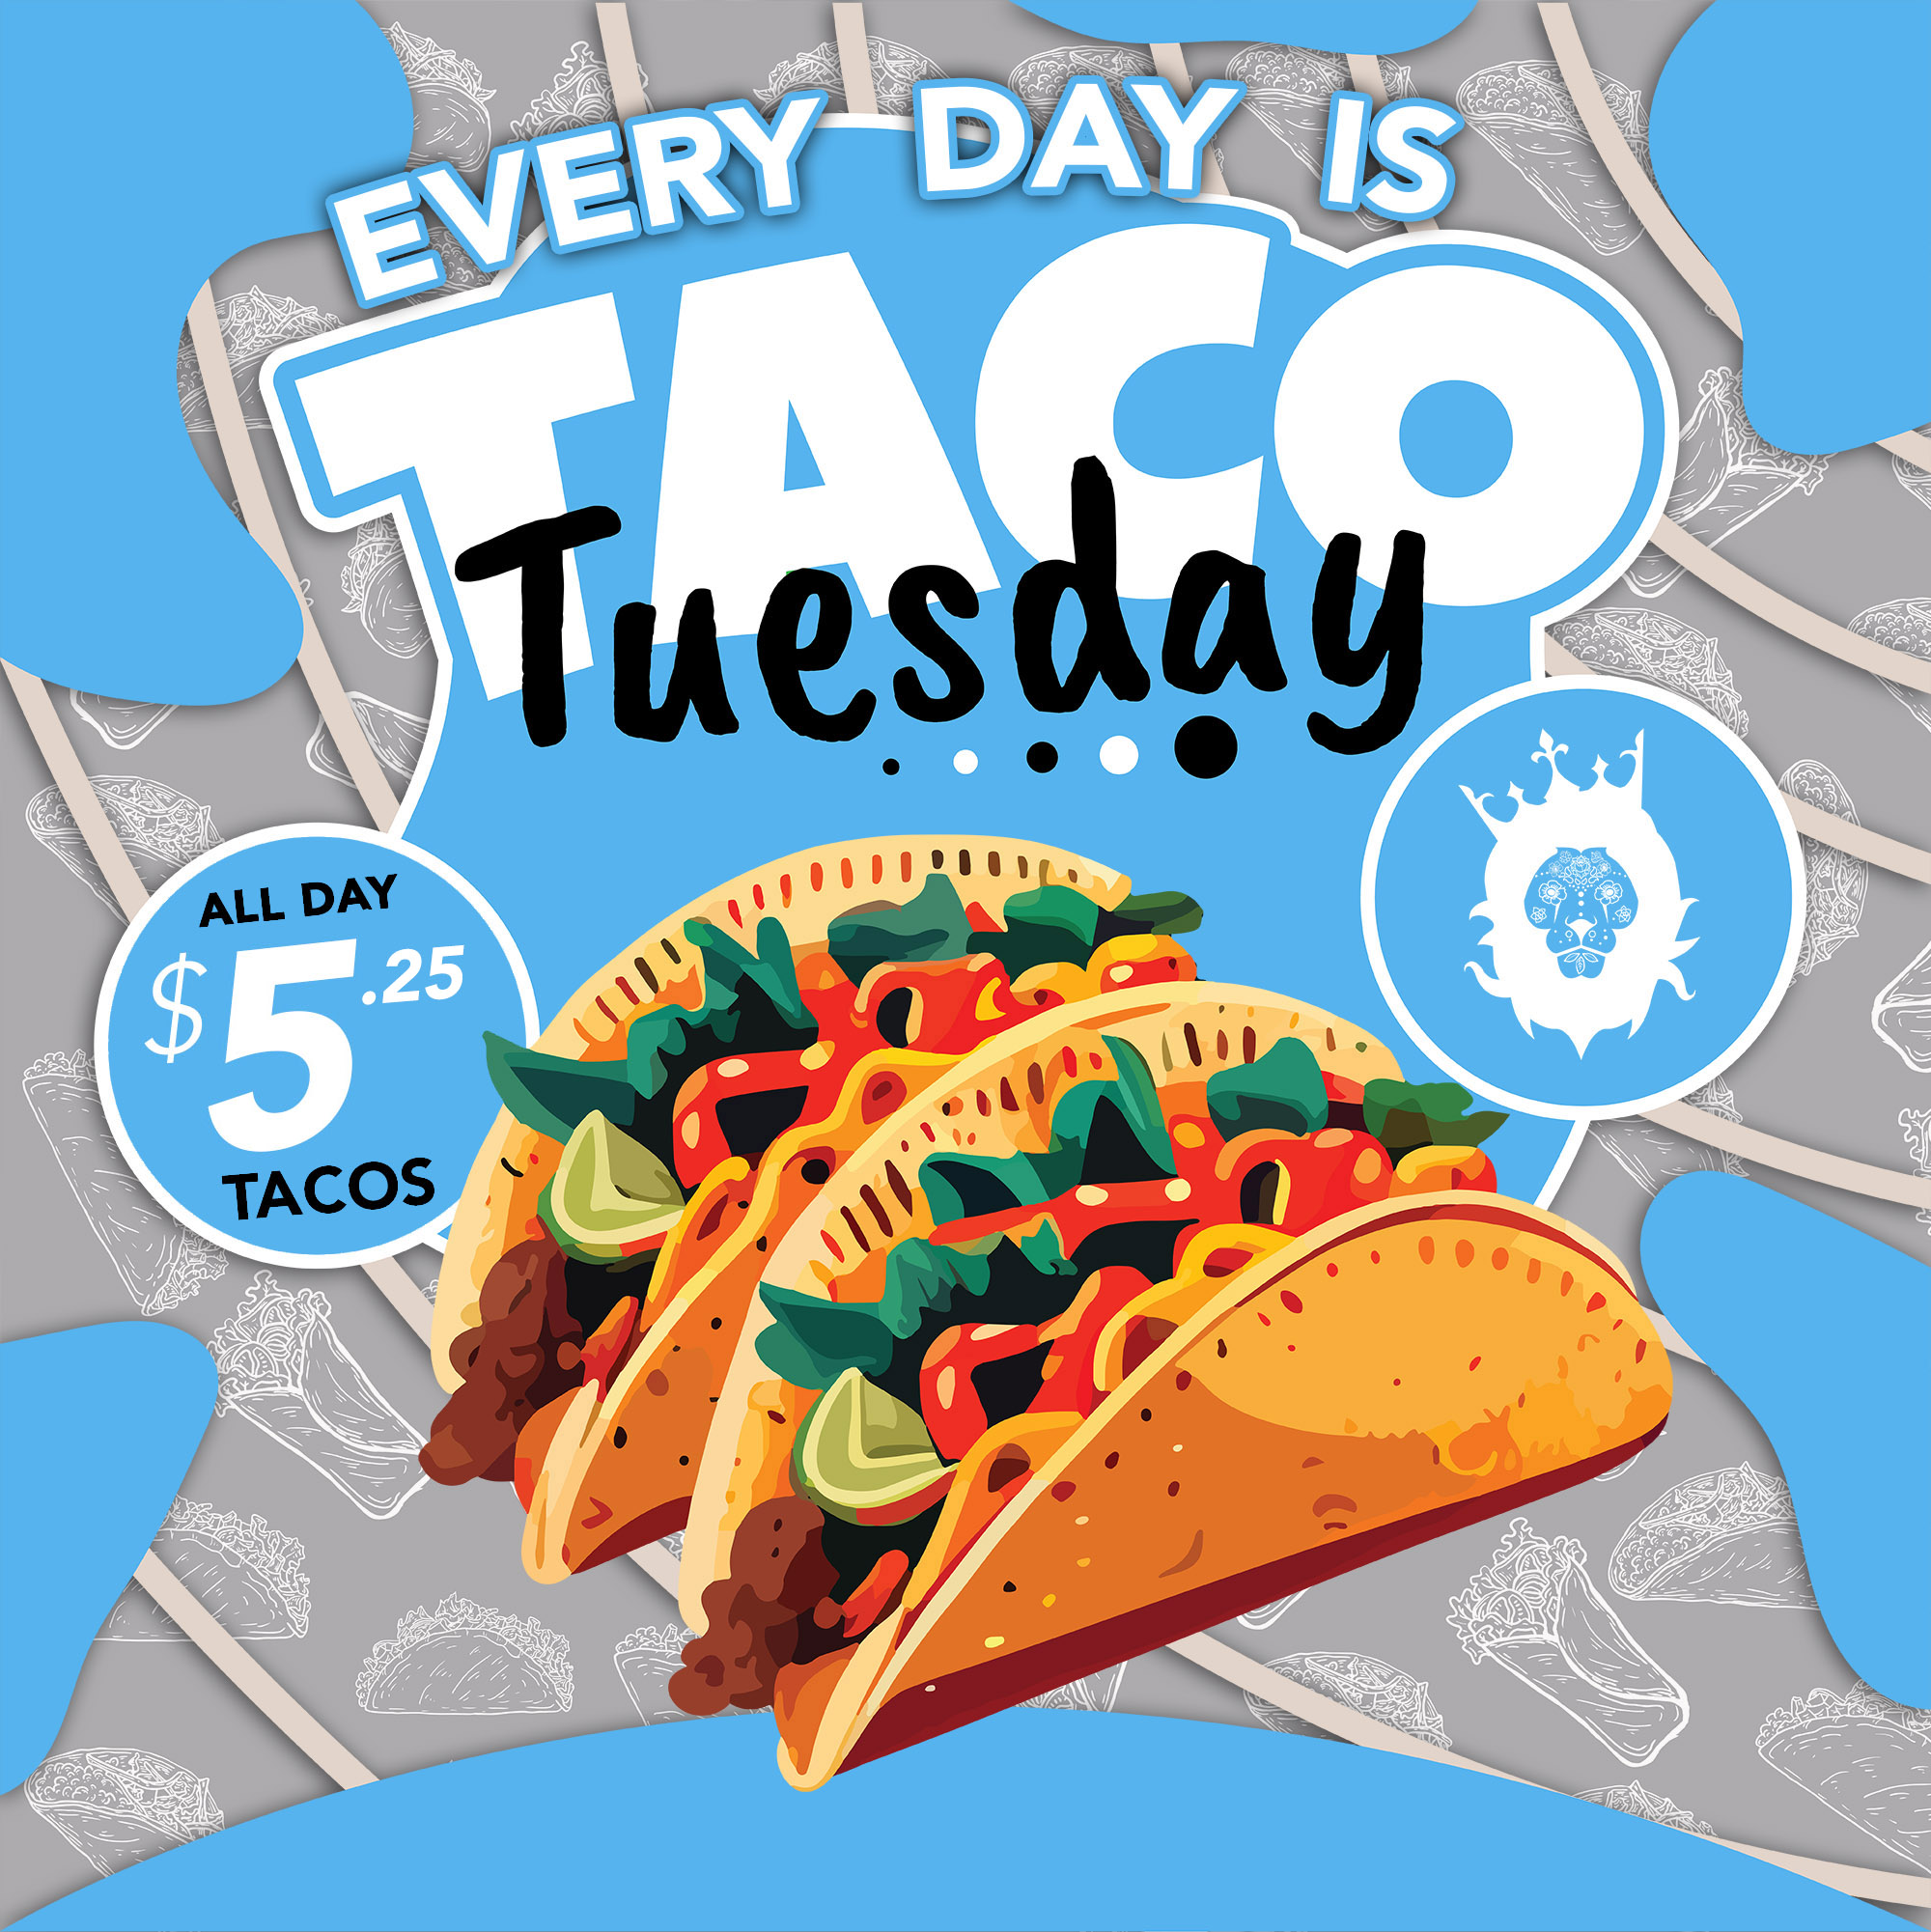 Every Day is Taco Tuesday - $5.25 Tacos ALL DAY